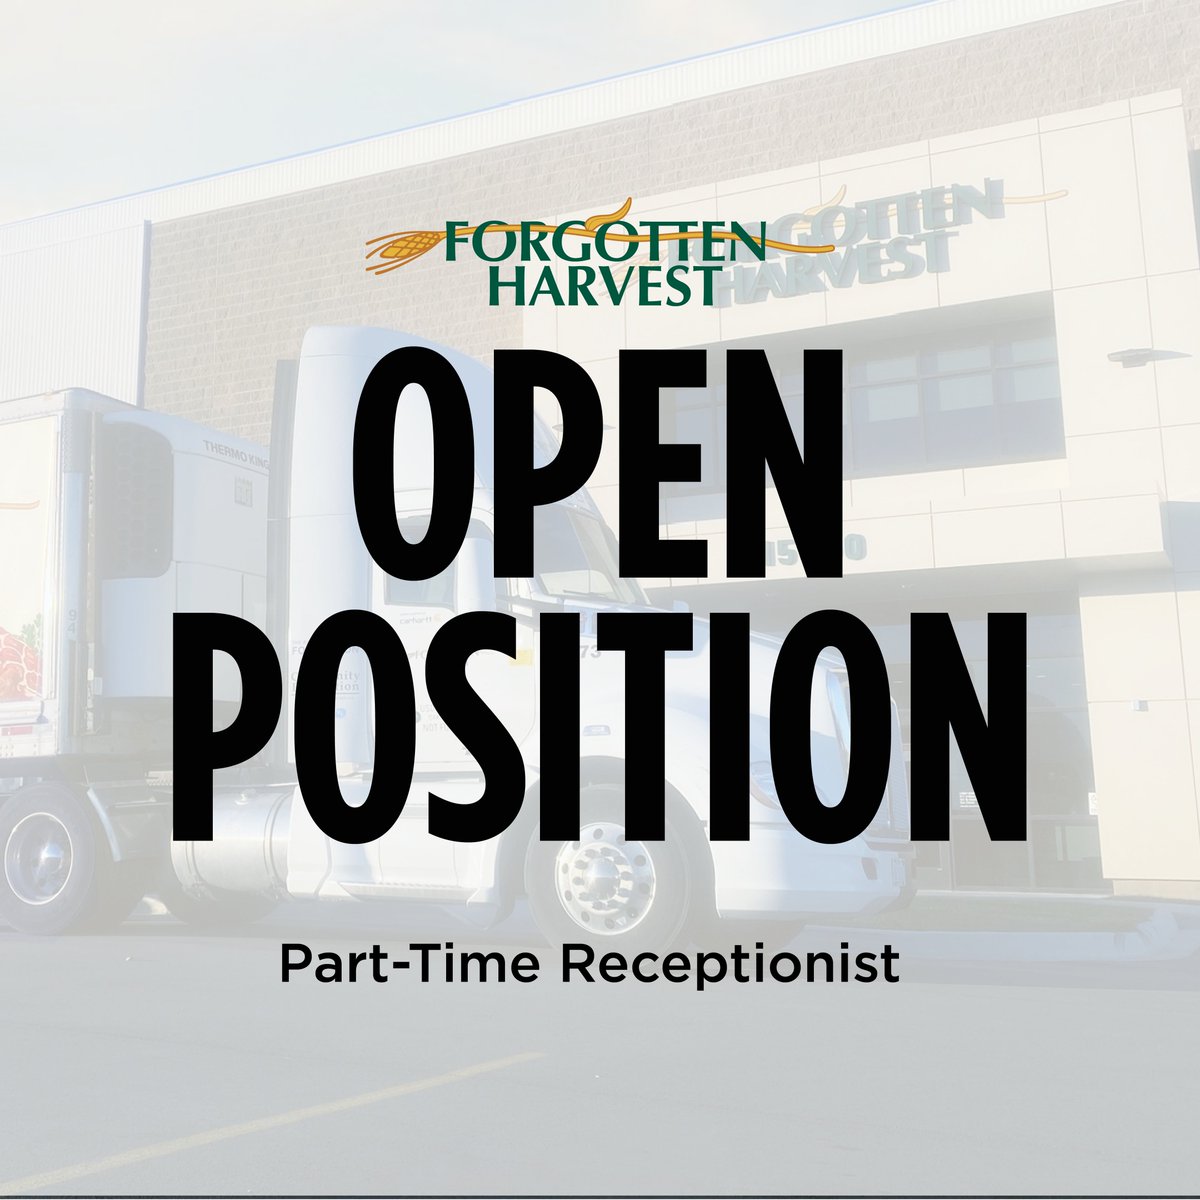 FH is seeking a part-time Receptionist to be the first point of contact for all who visit or call our headquarters. The scheduled hours for this position are approximately 25 hours per week, working Tuesday-Friday afternoon and all day on Saturday. indeedhi.re/42Arm4S